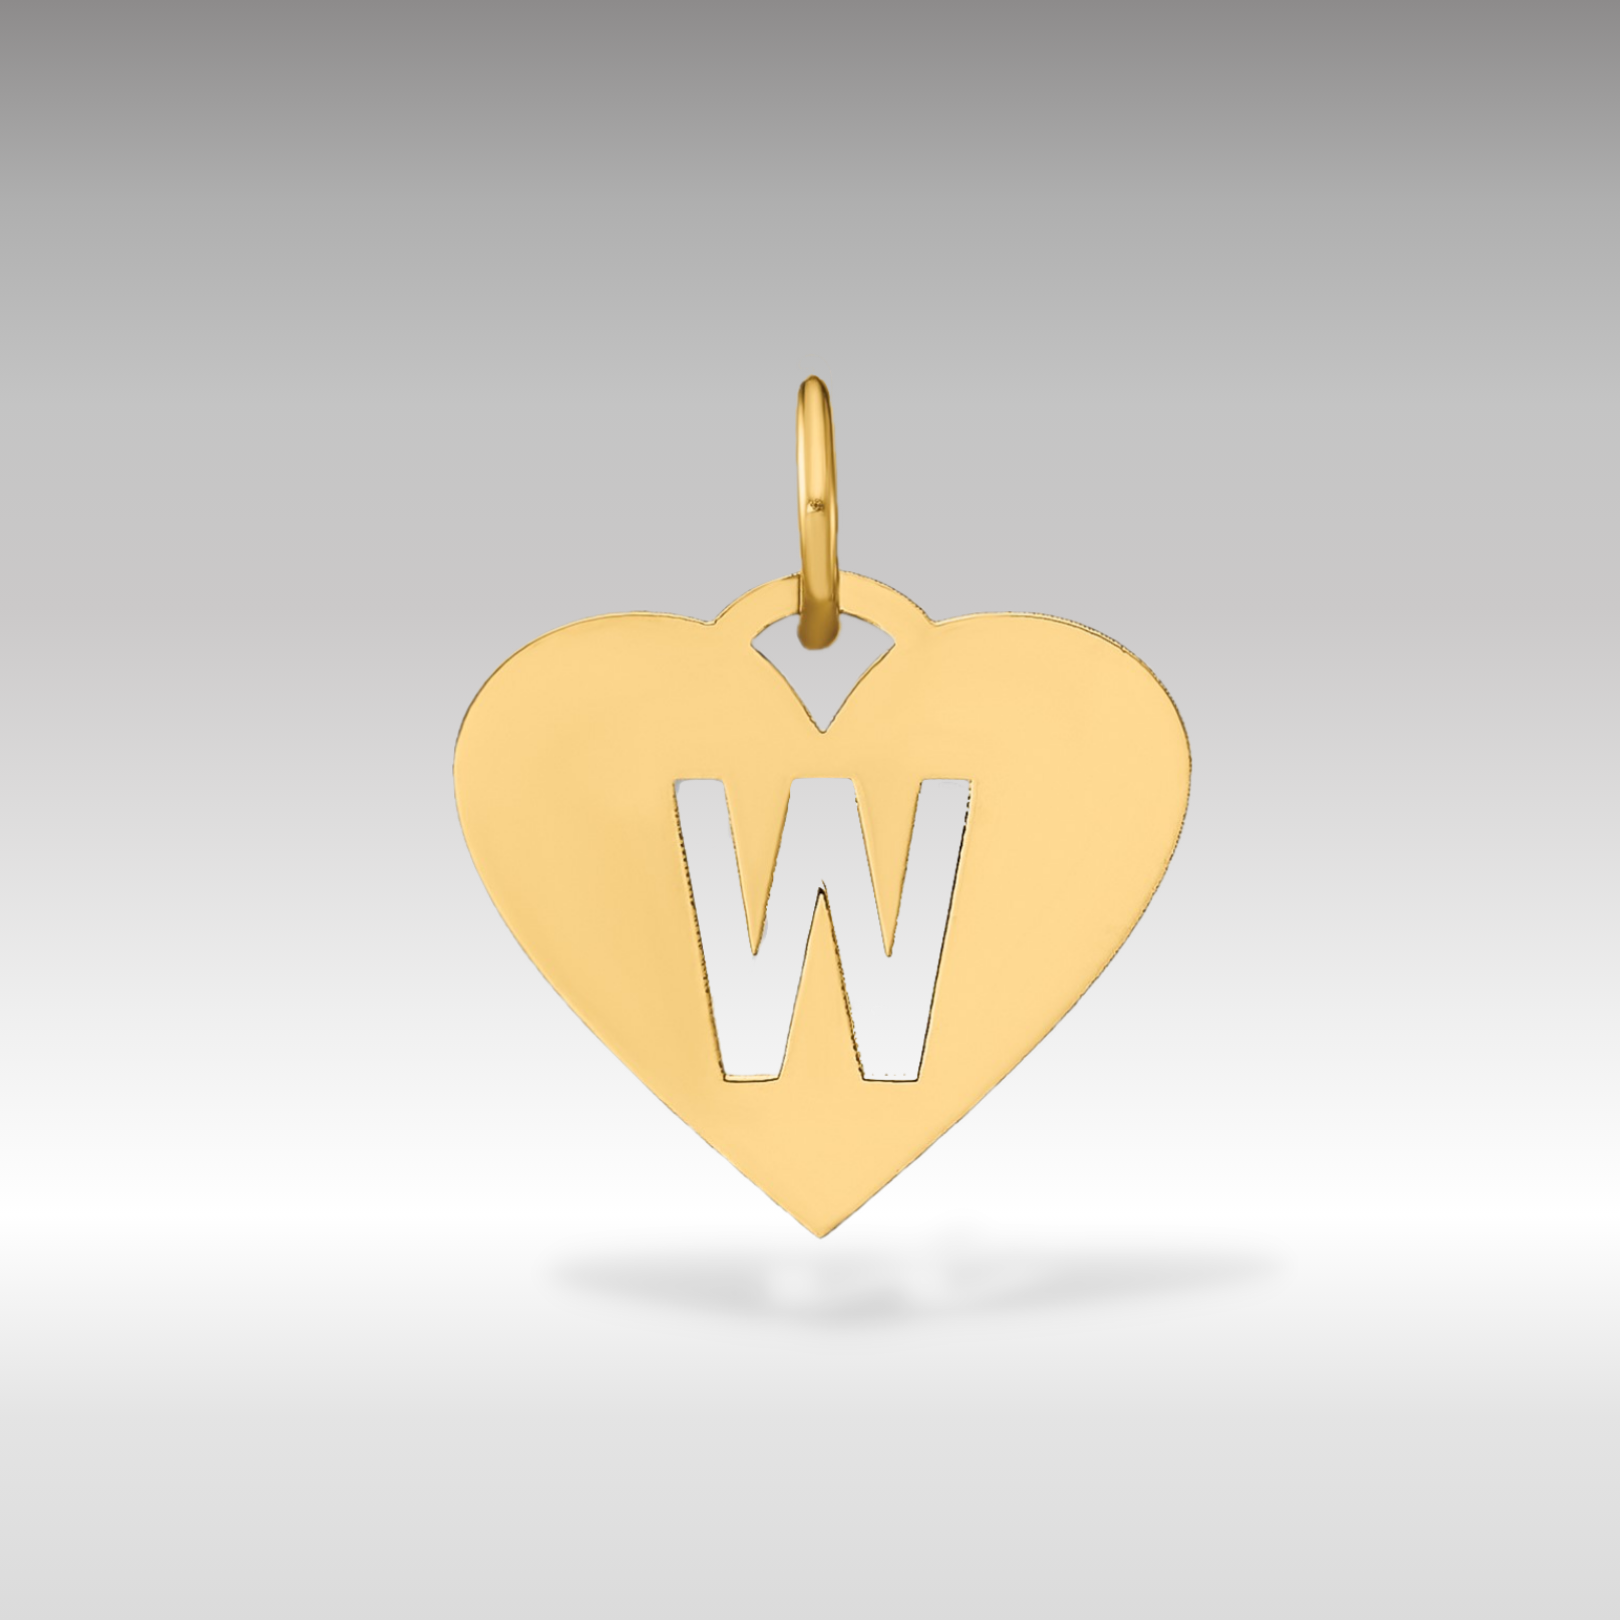 14K Gold Heart Pendant with Letter 'W' - Charlie & Co. Jewelry